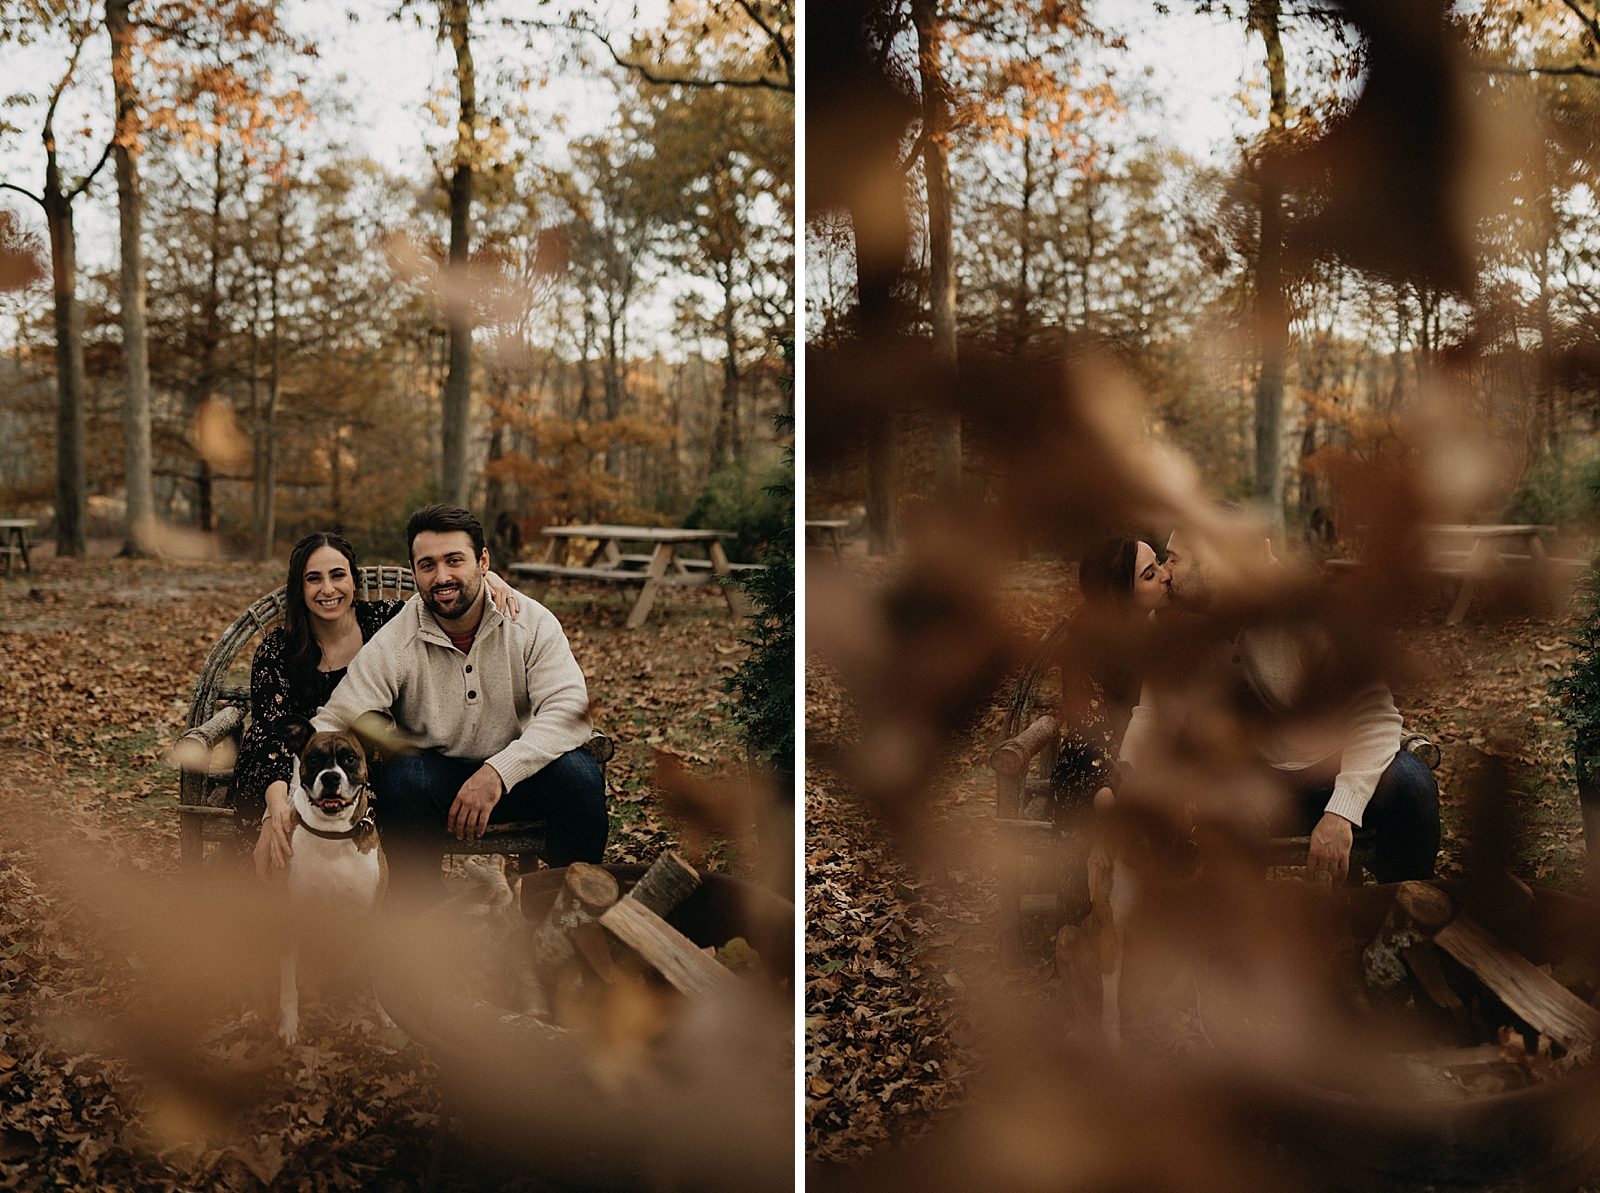 Couple sitting with dog for portrait obstructed by dead fall leafs